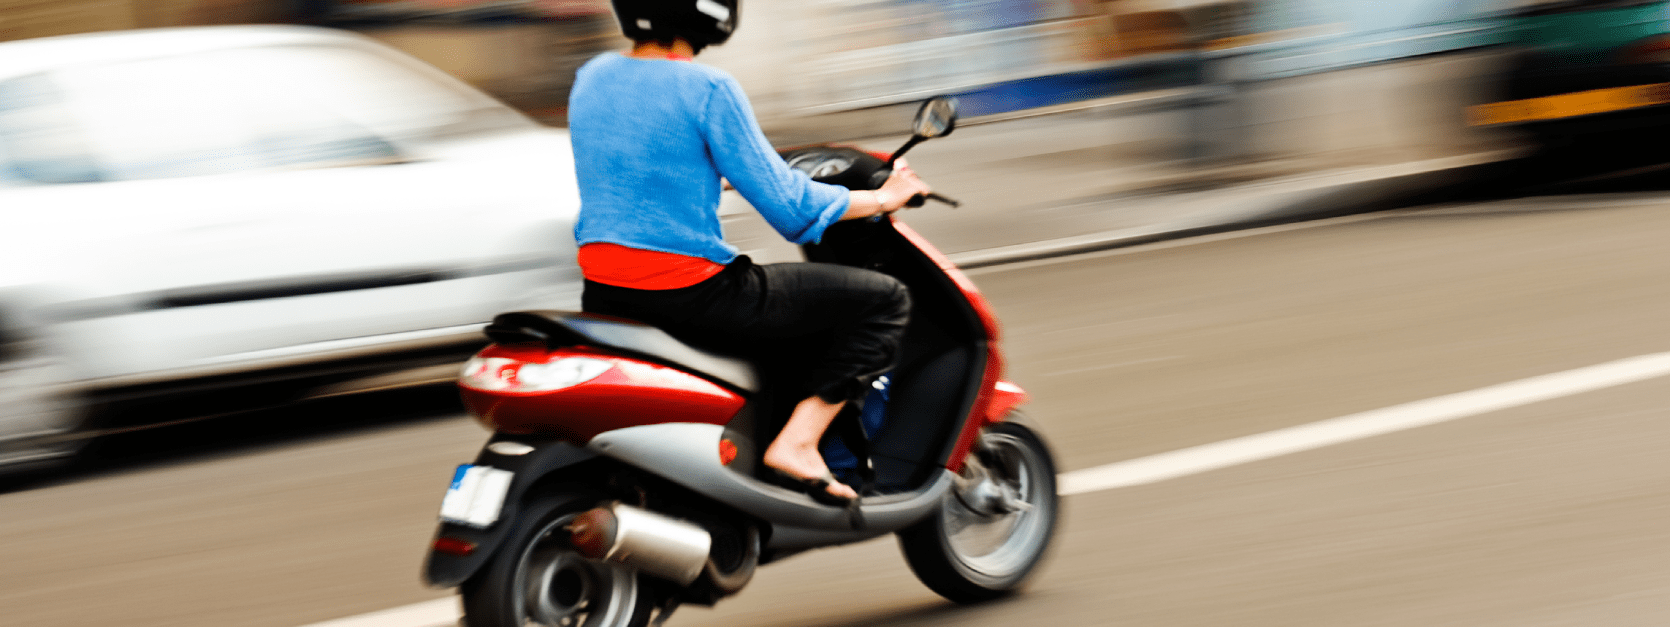 A scooter requires a valid motorcycle license